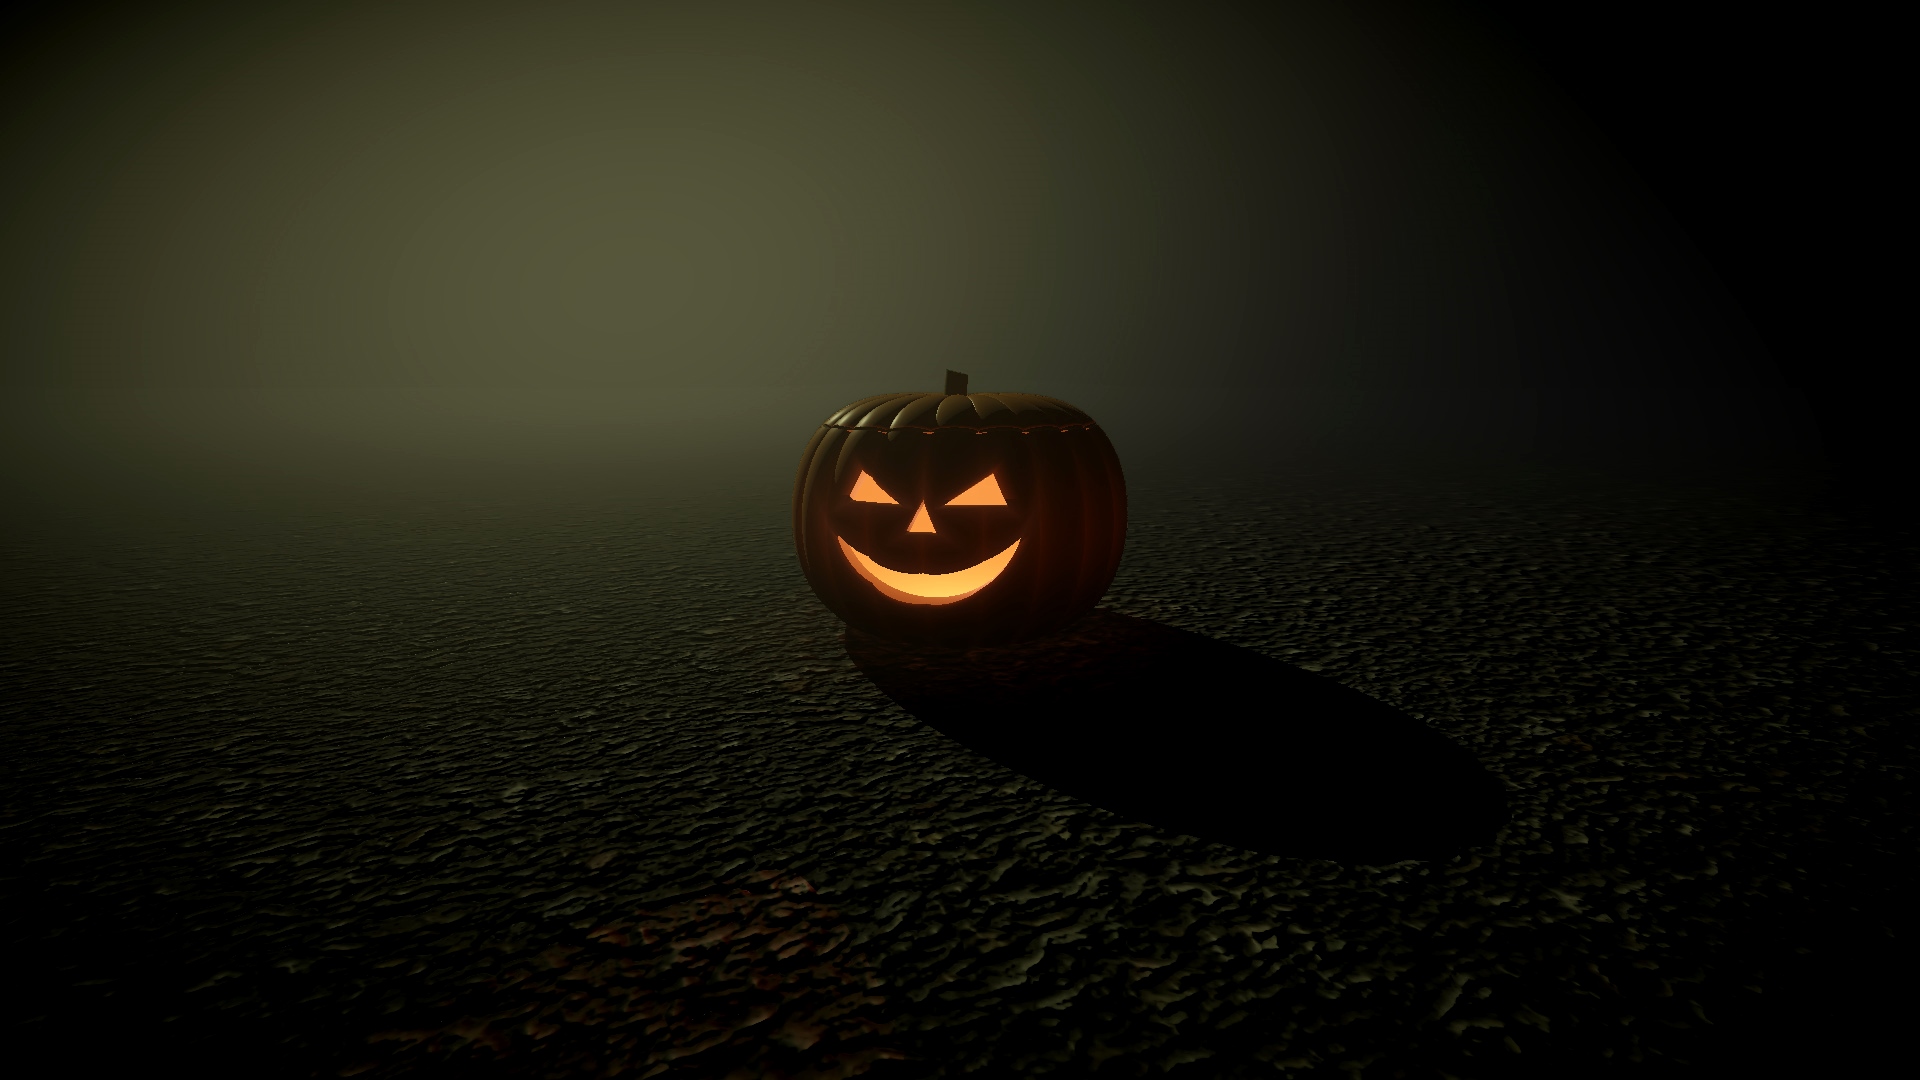 Free Halloween Screensavers To Download posted by John Cunningham